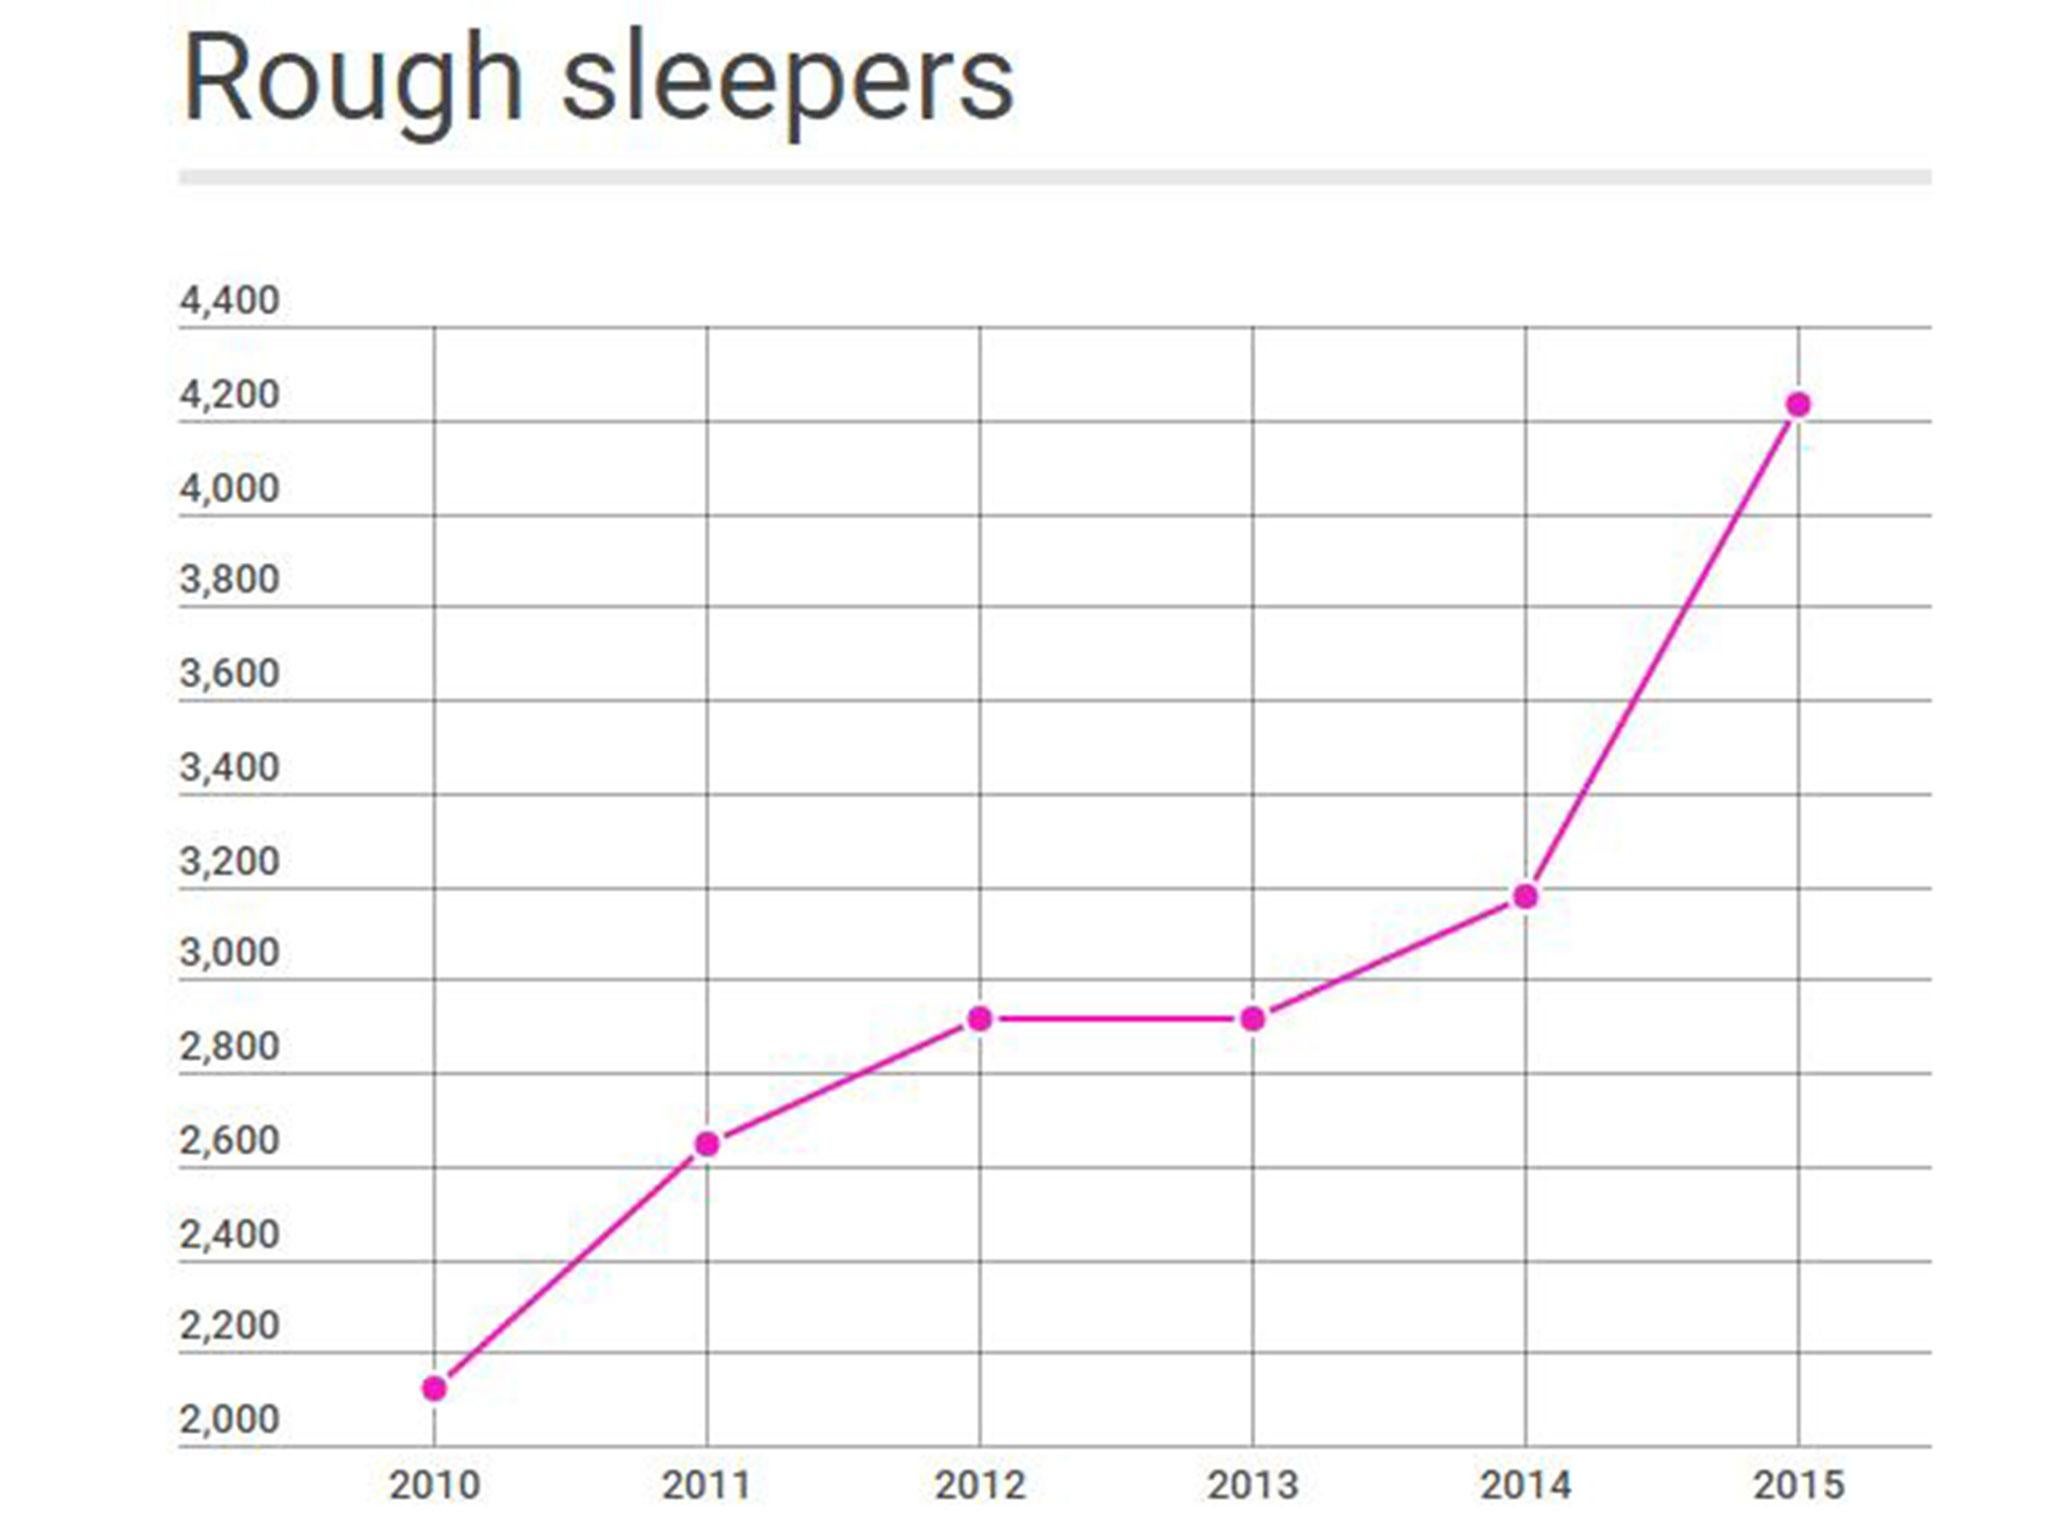 Homelessness Charts And Graphs